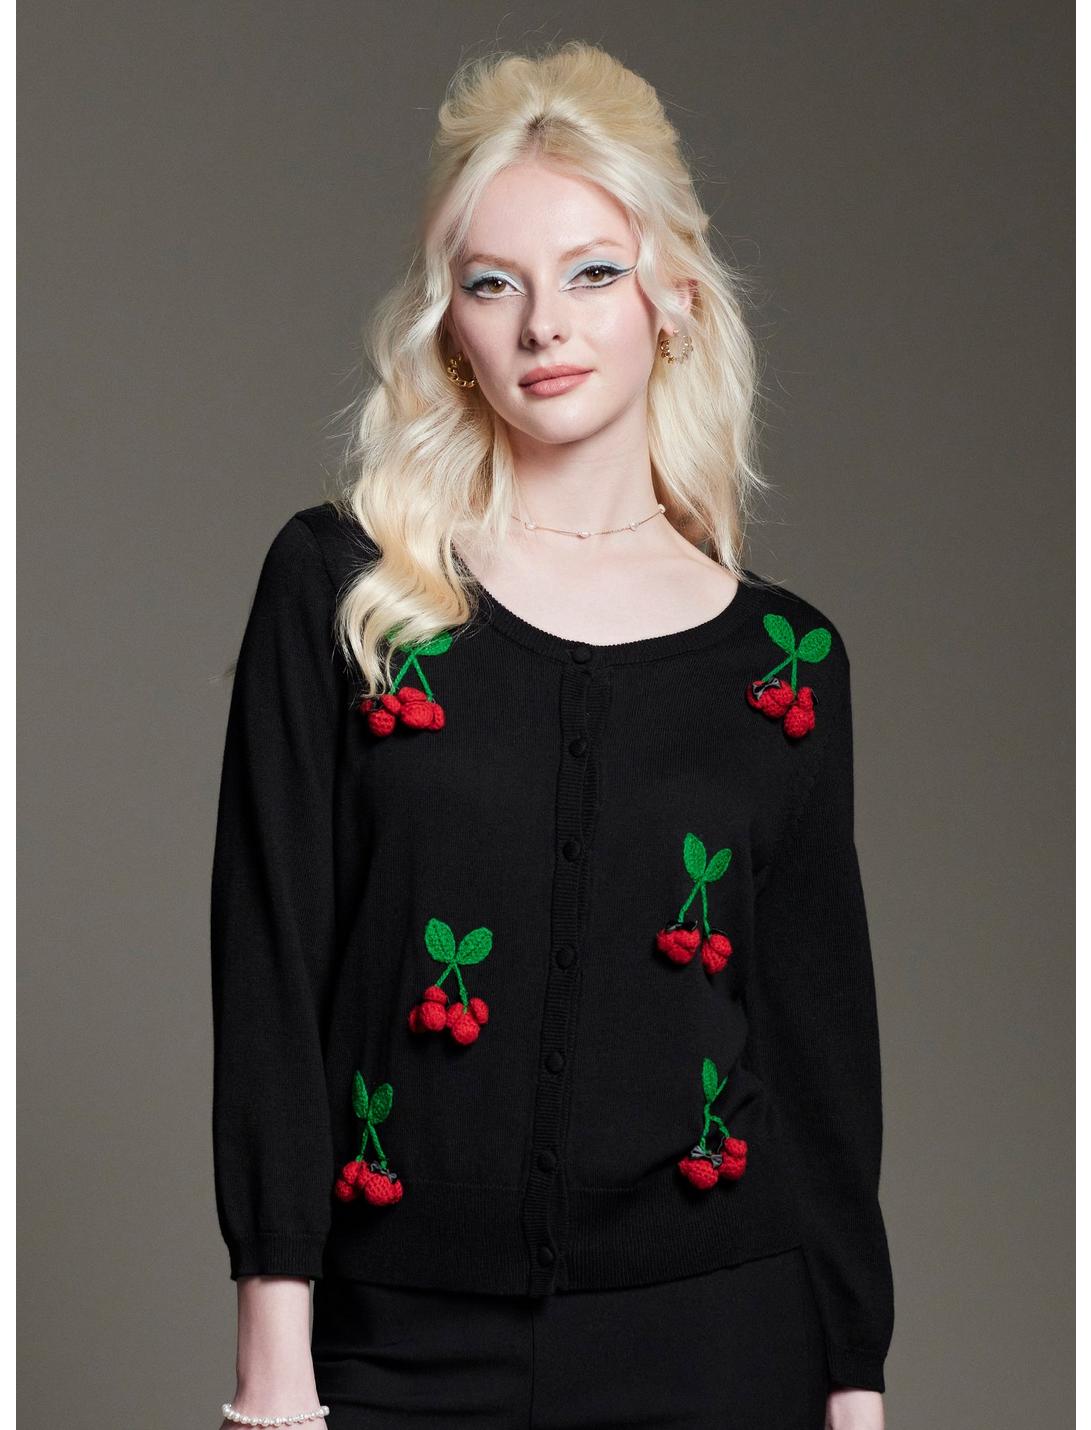 Her Universe Disney Minnie Mouse Knit Cherry Cardigan Her Universe Exclusive, MULTI, hi-res